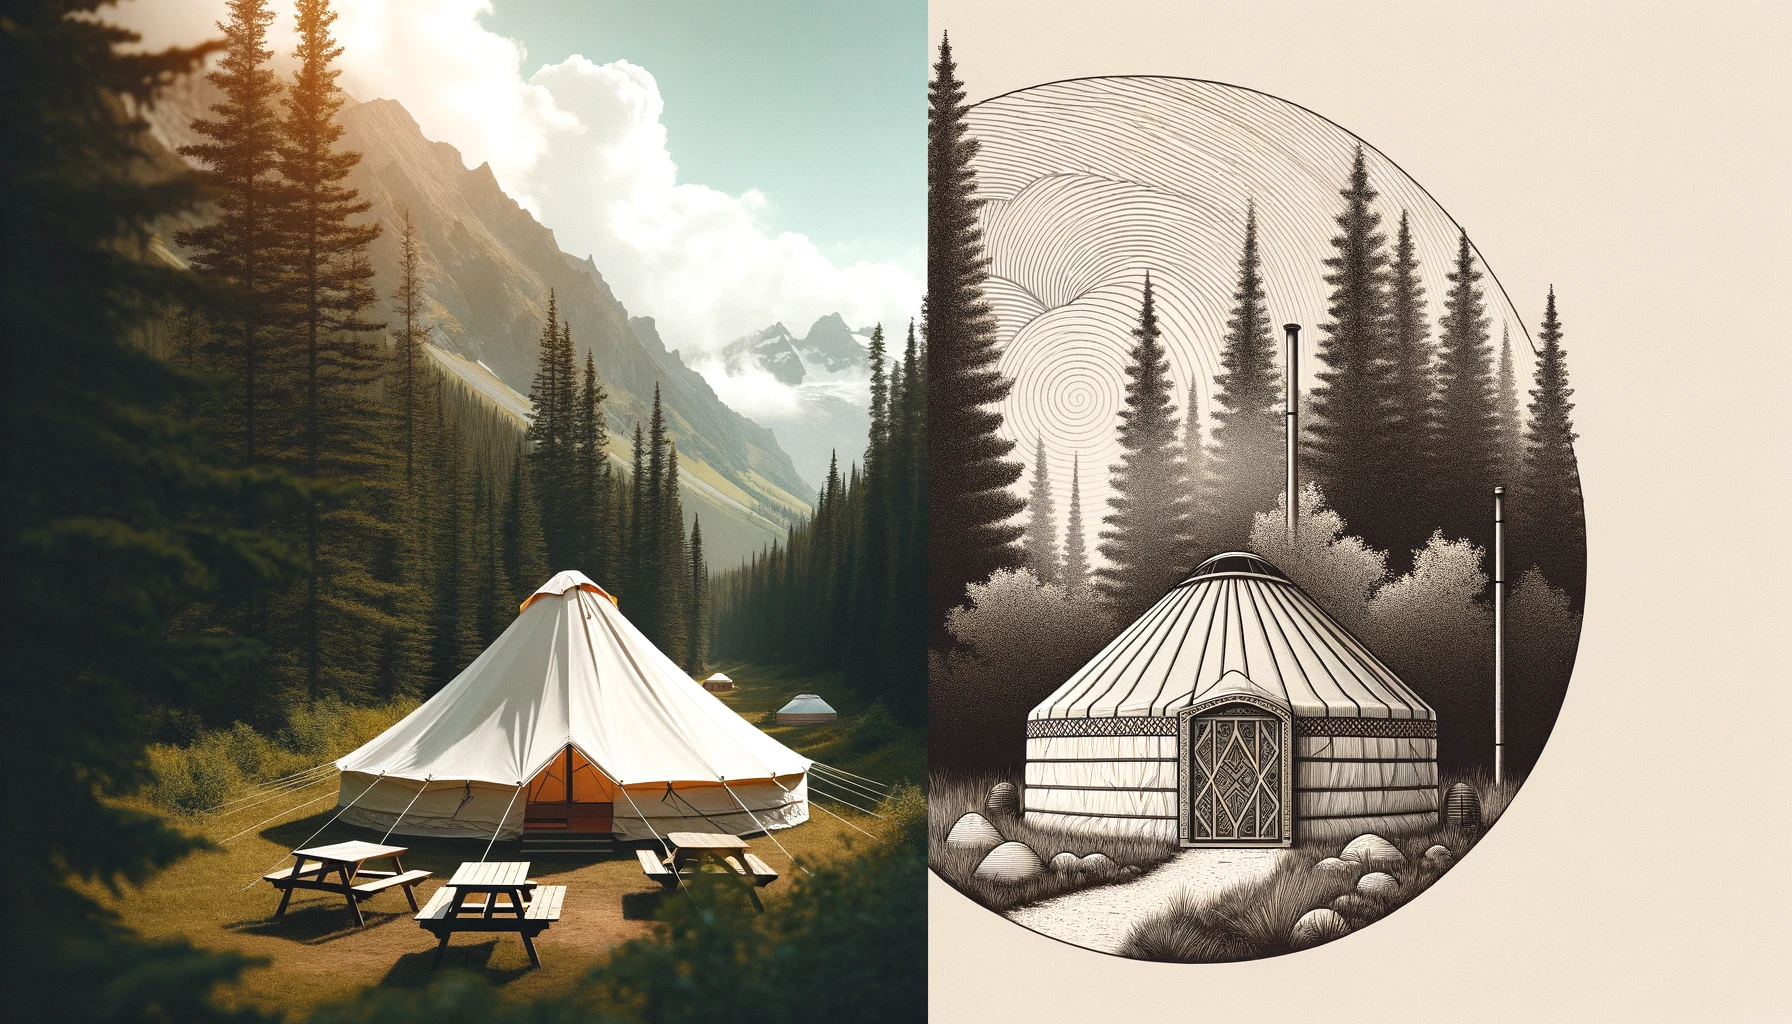 Bell Tent Vs Yurt: Know the Key Difference